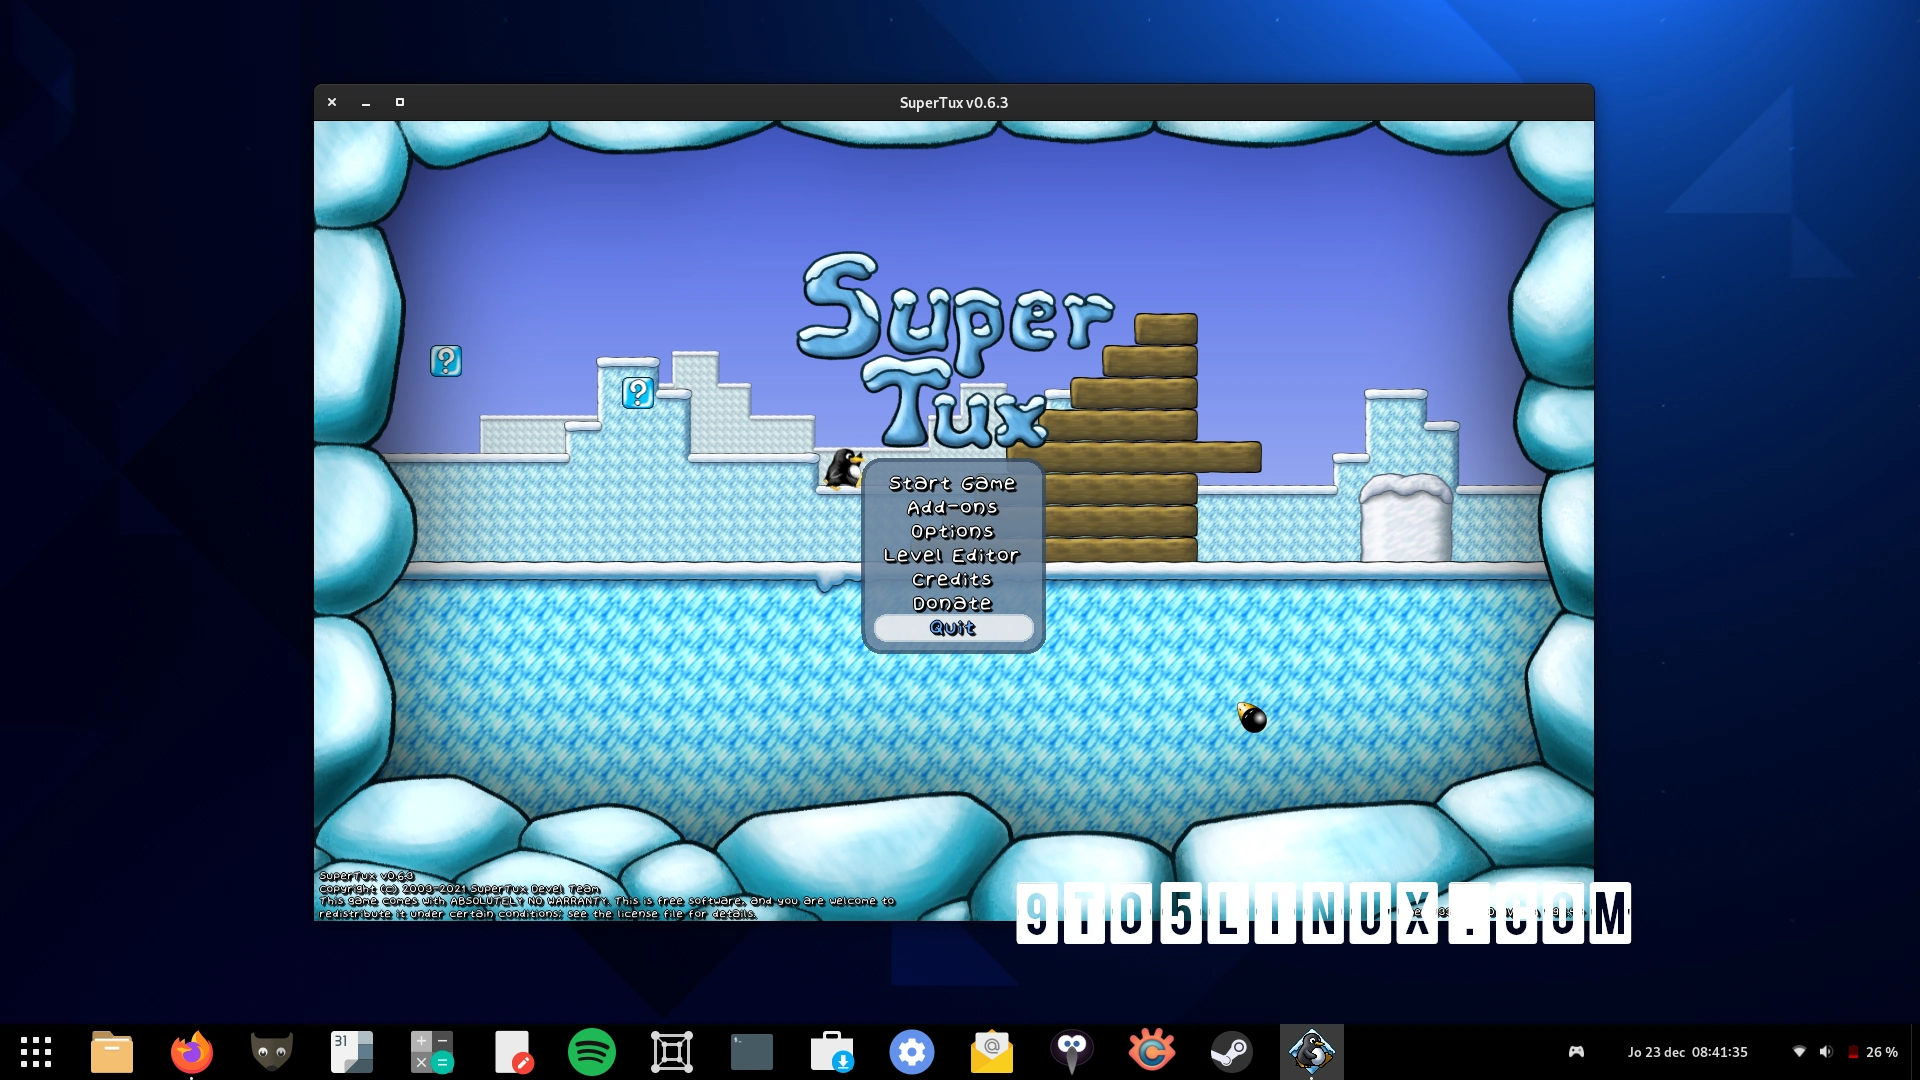 SuperTux 0.6.3 Arcade Game Arrives Just in Time for Christmas with New Features